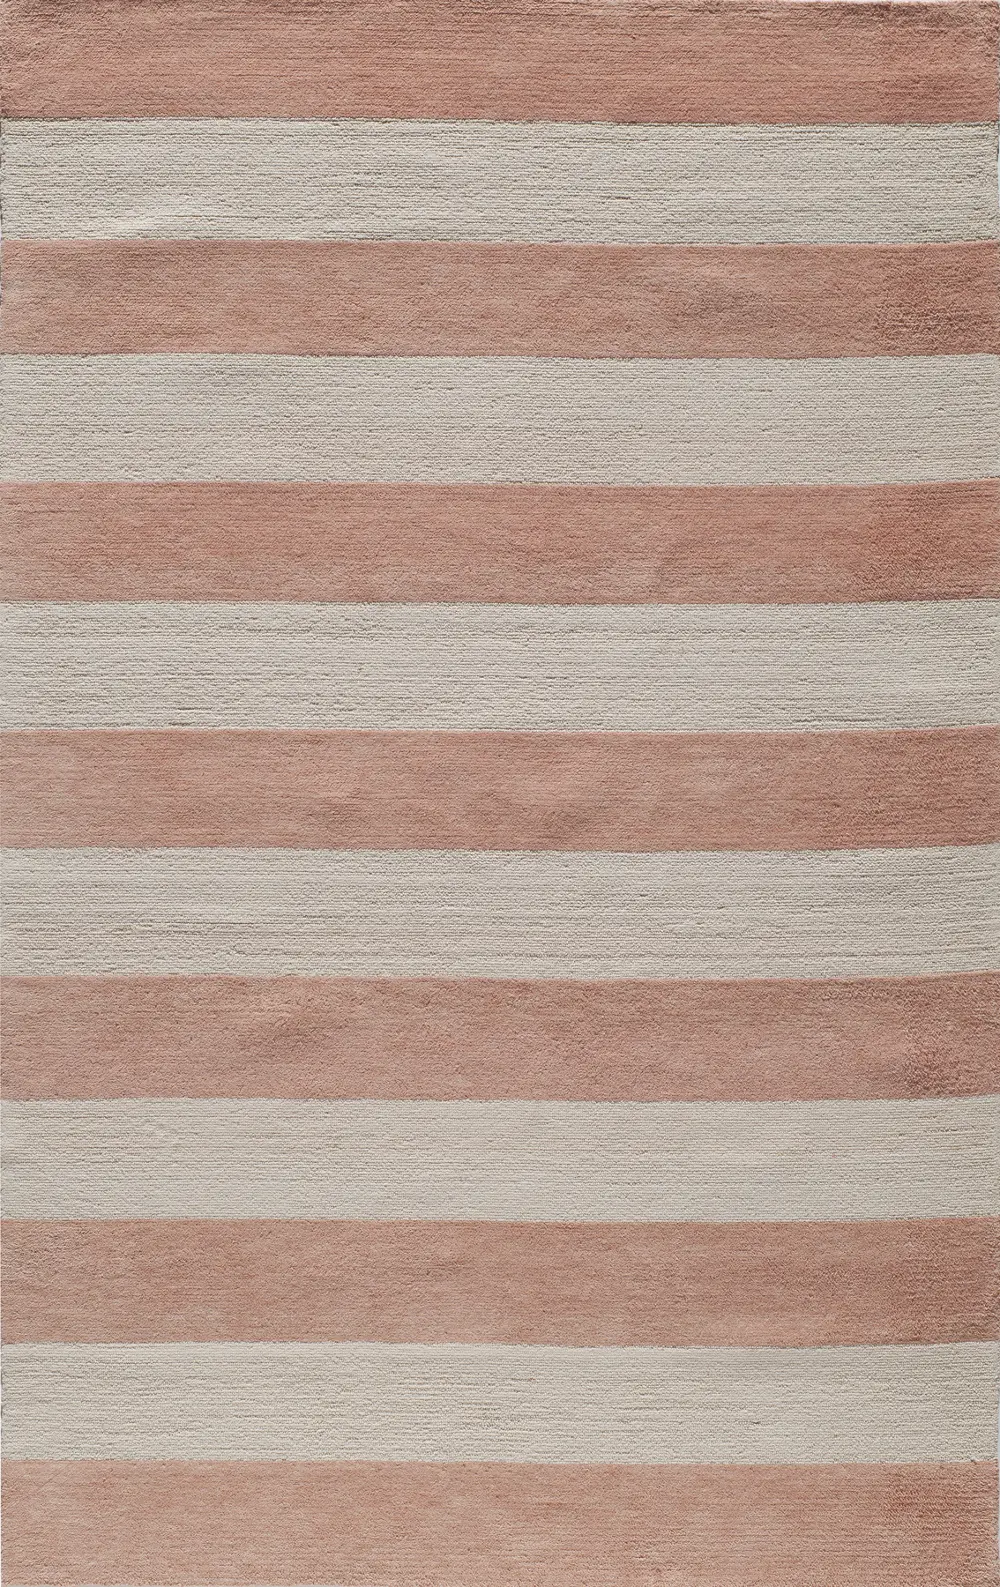 4 x 6 Small Striped Pink Area Rug - Classic Cabana-1